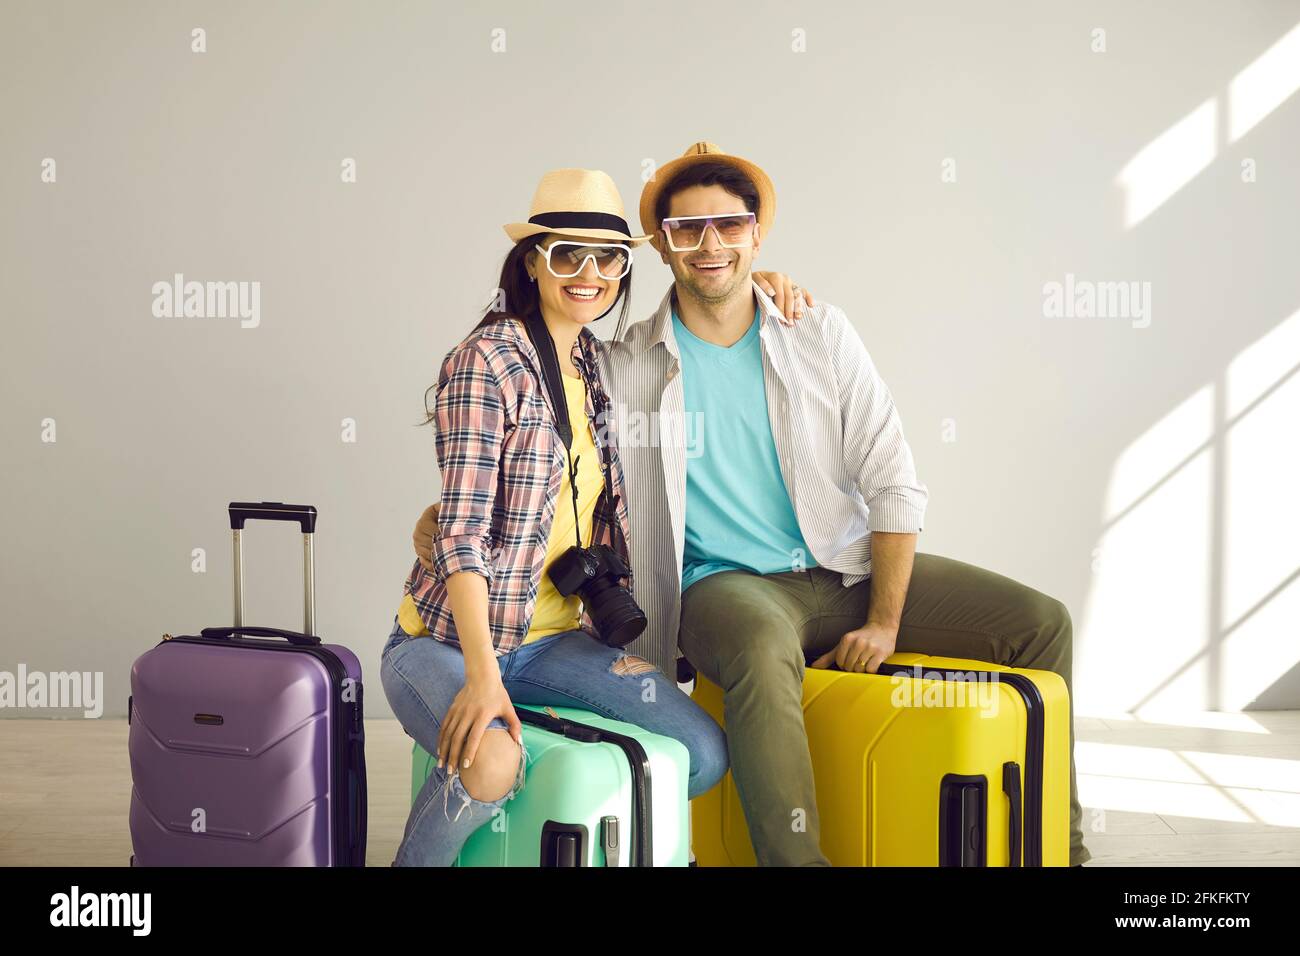 Studio portrait of happy young couple sitting on suitcases packed for holiday trip Stock Photo